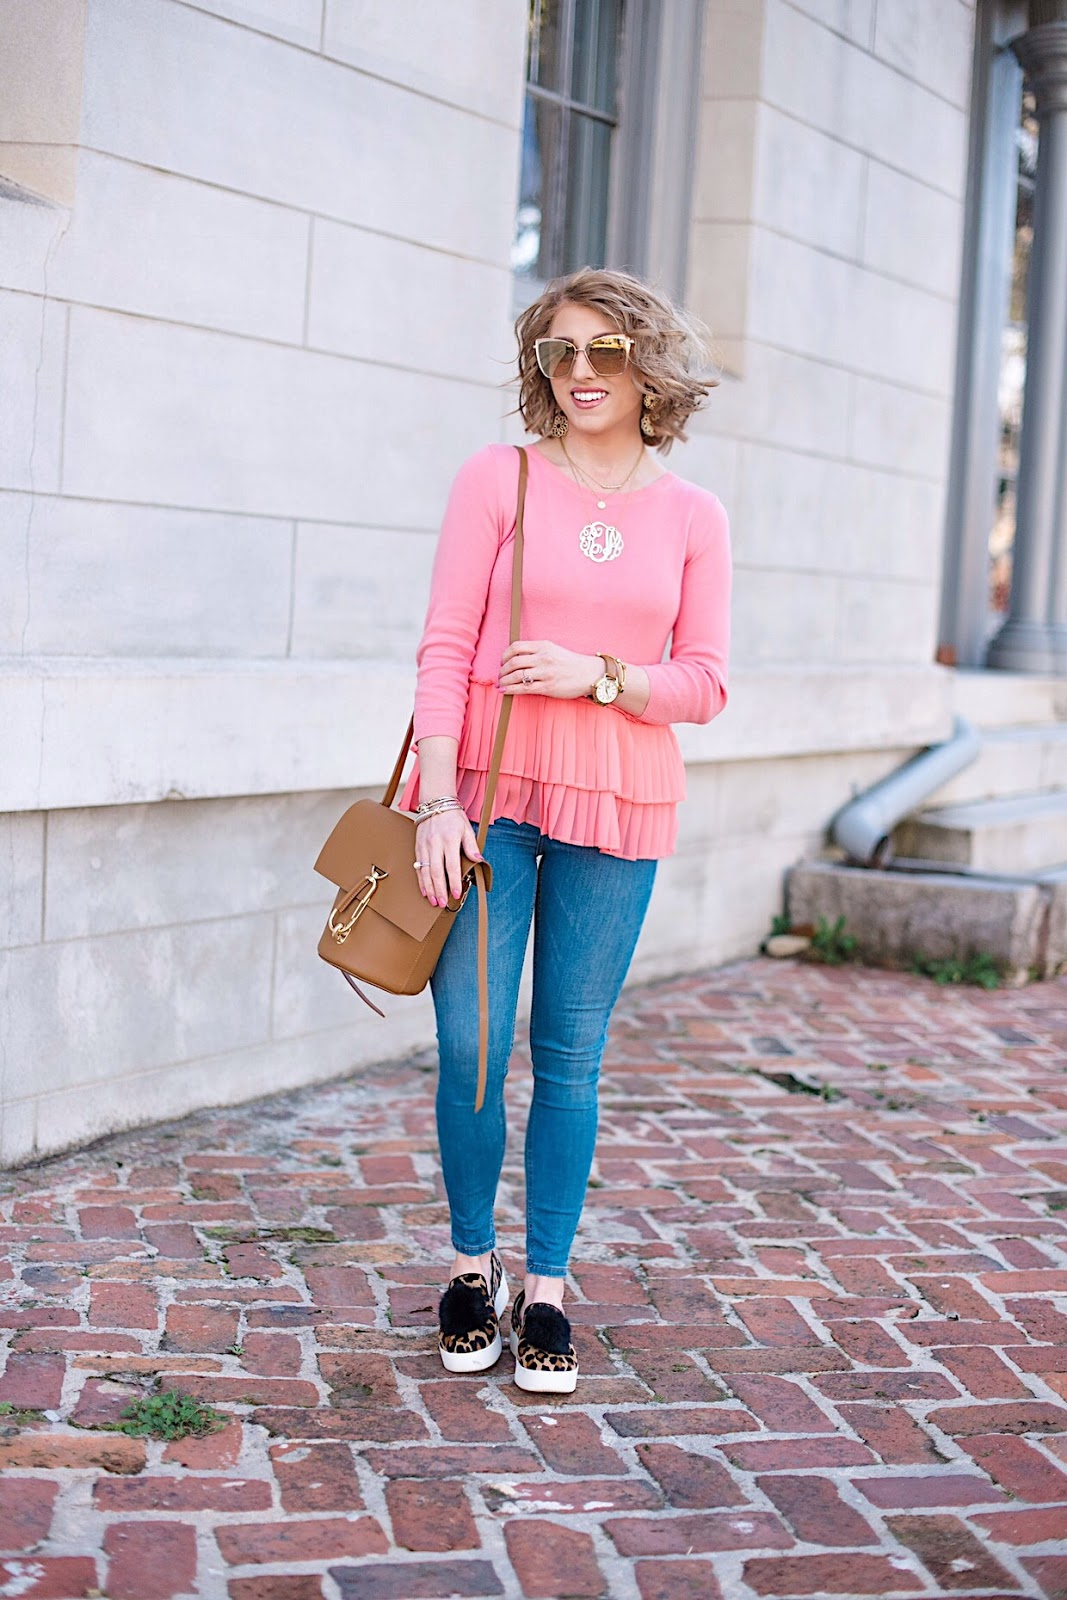 Transition to spring - Ruffle Hem Sweater - Click through for more on Something Delightful Blog